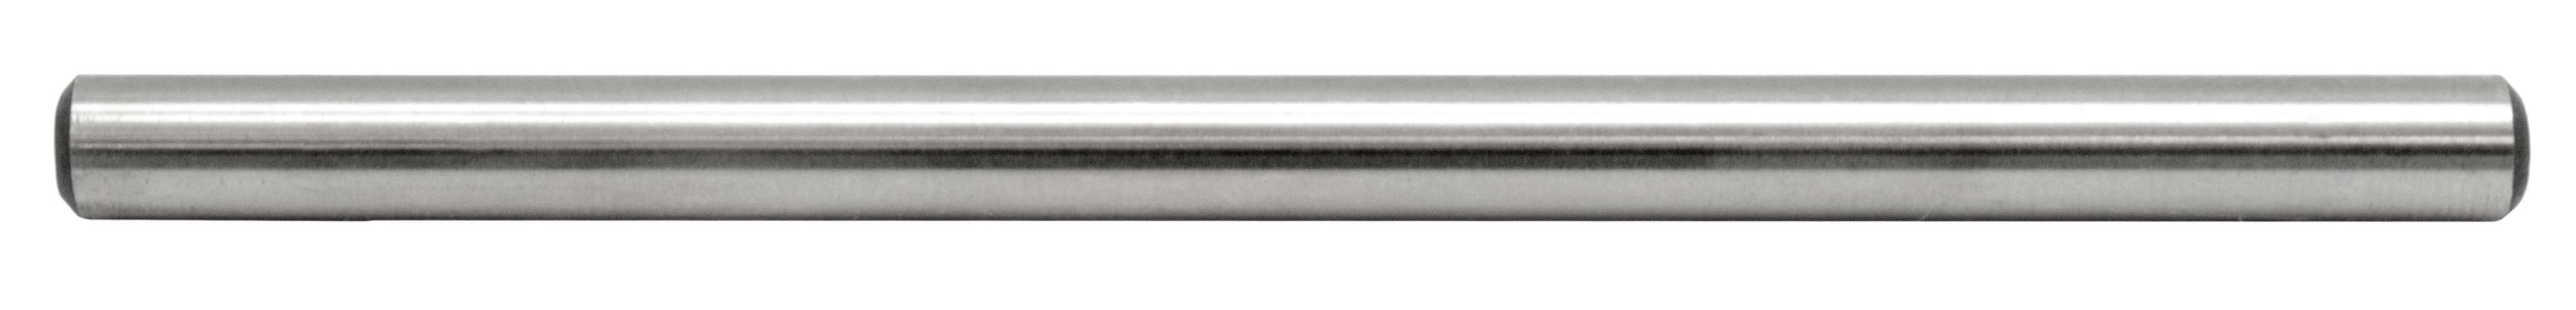 Drill Blanks High Speed Steel Fractional Sizes